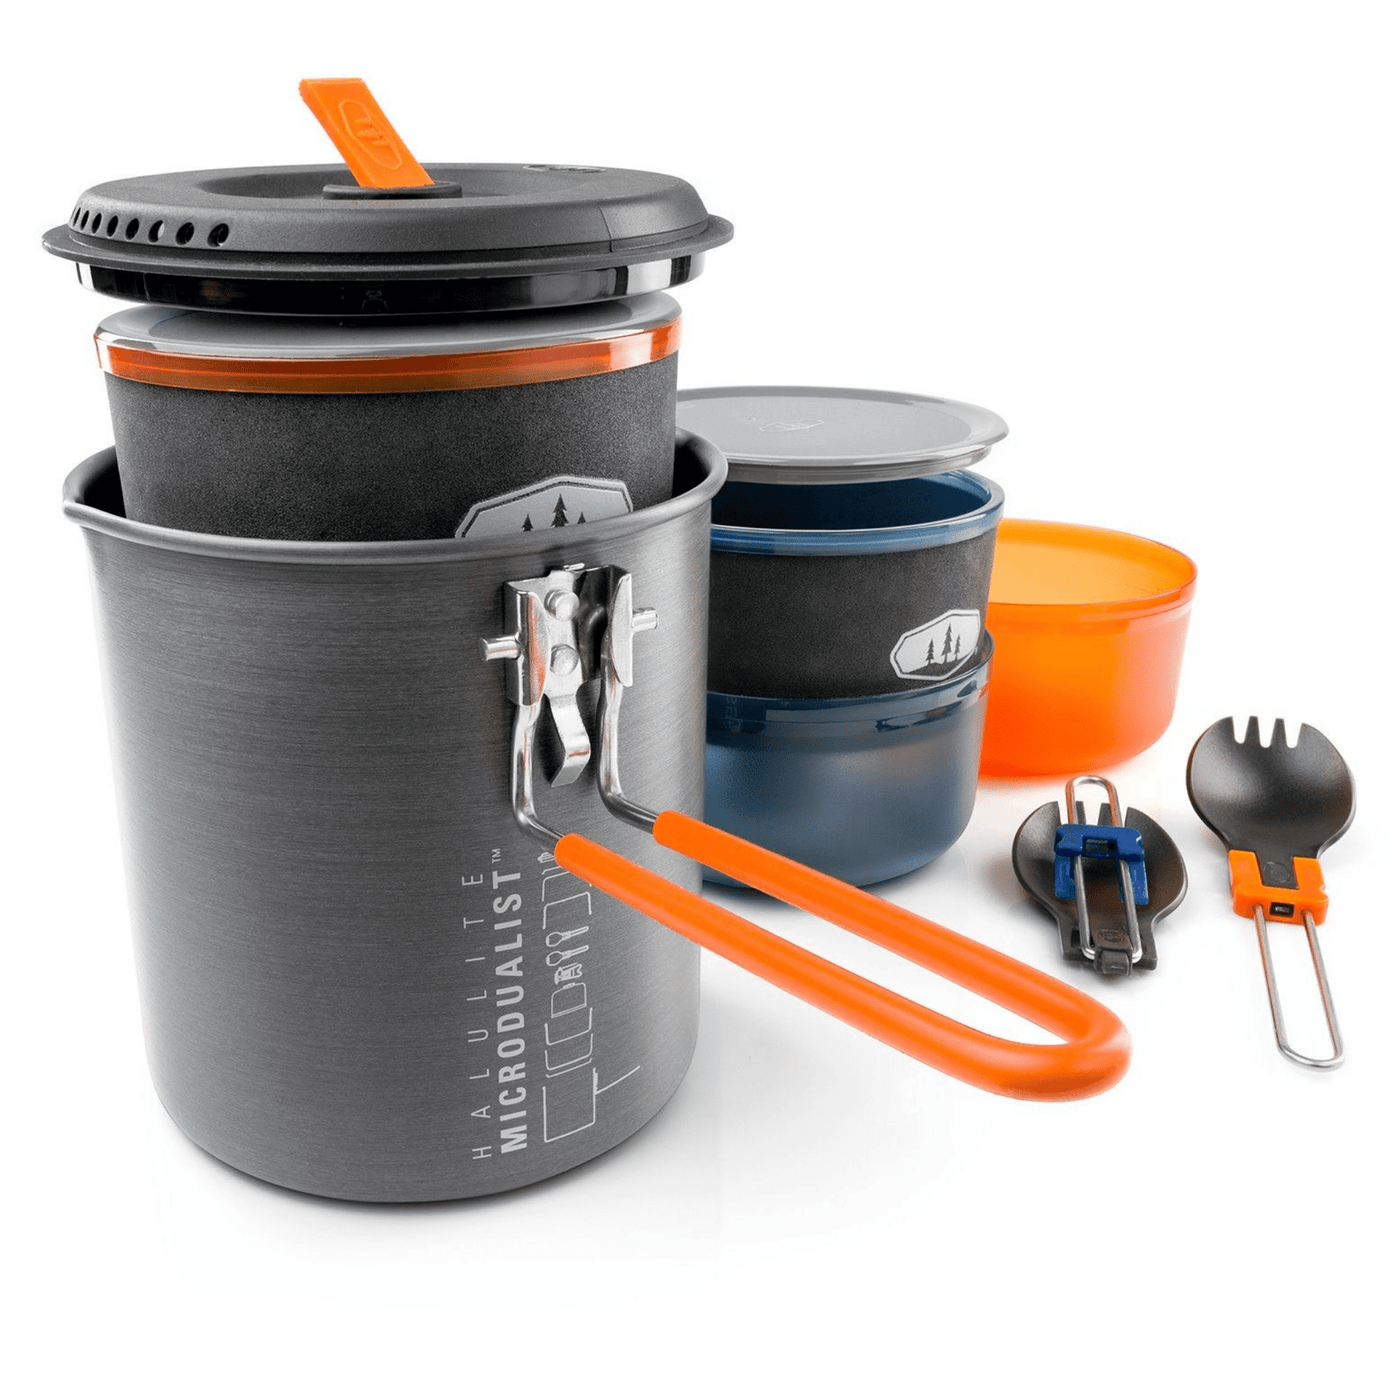 GSI Halulite Microdualist | 2 Person Camping Cooking Set | Further Faster Christchurch NZ